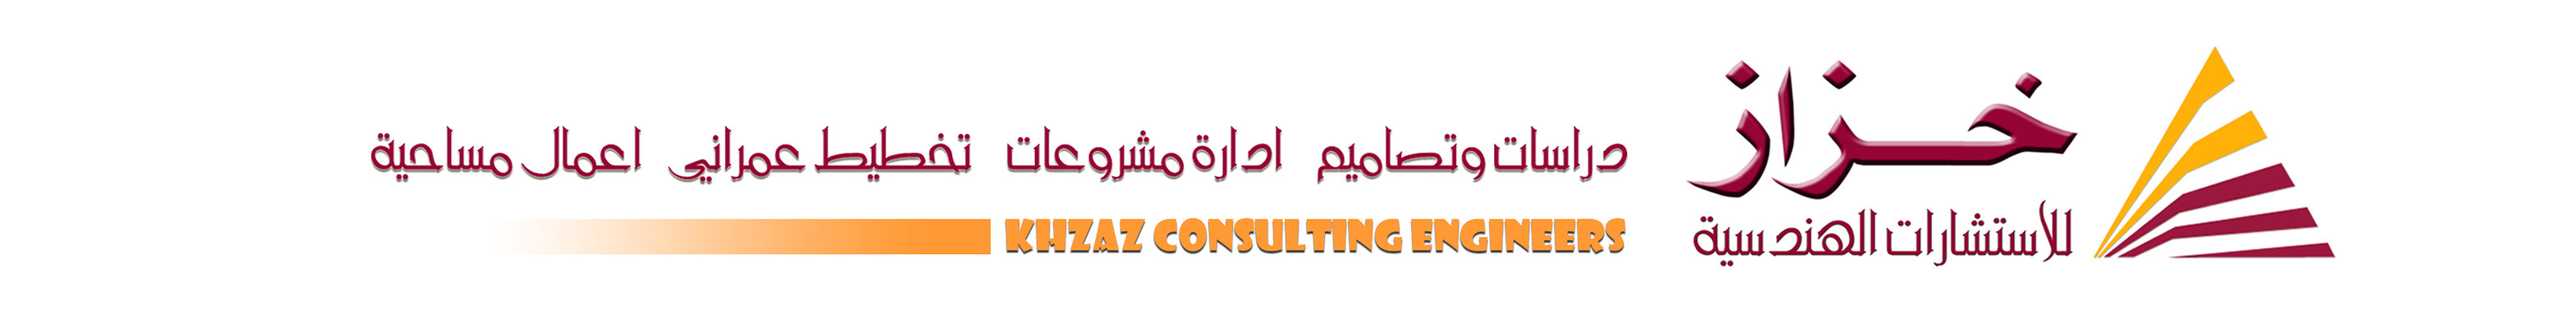 Khzaz Consulting Engineers's profile banner